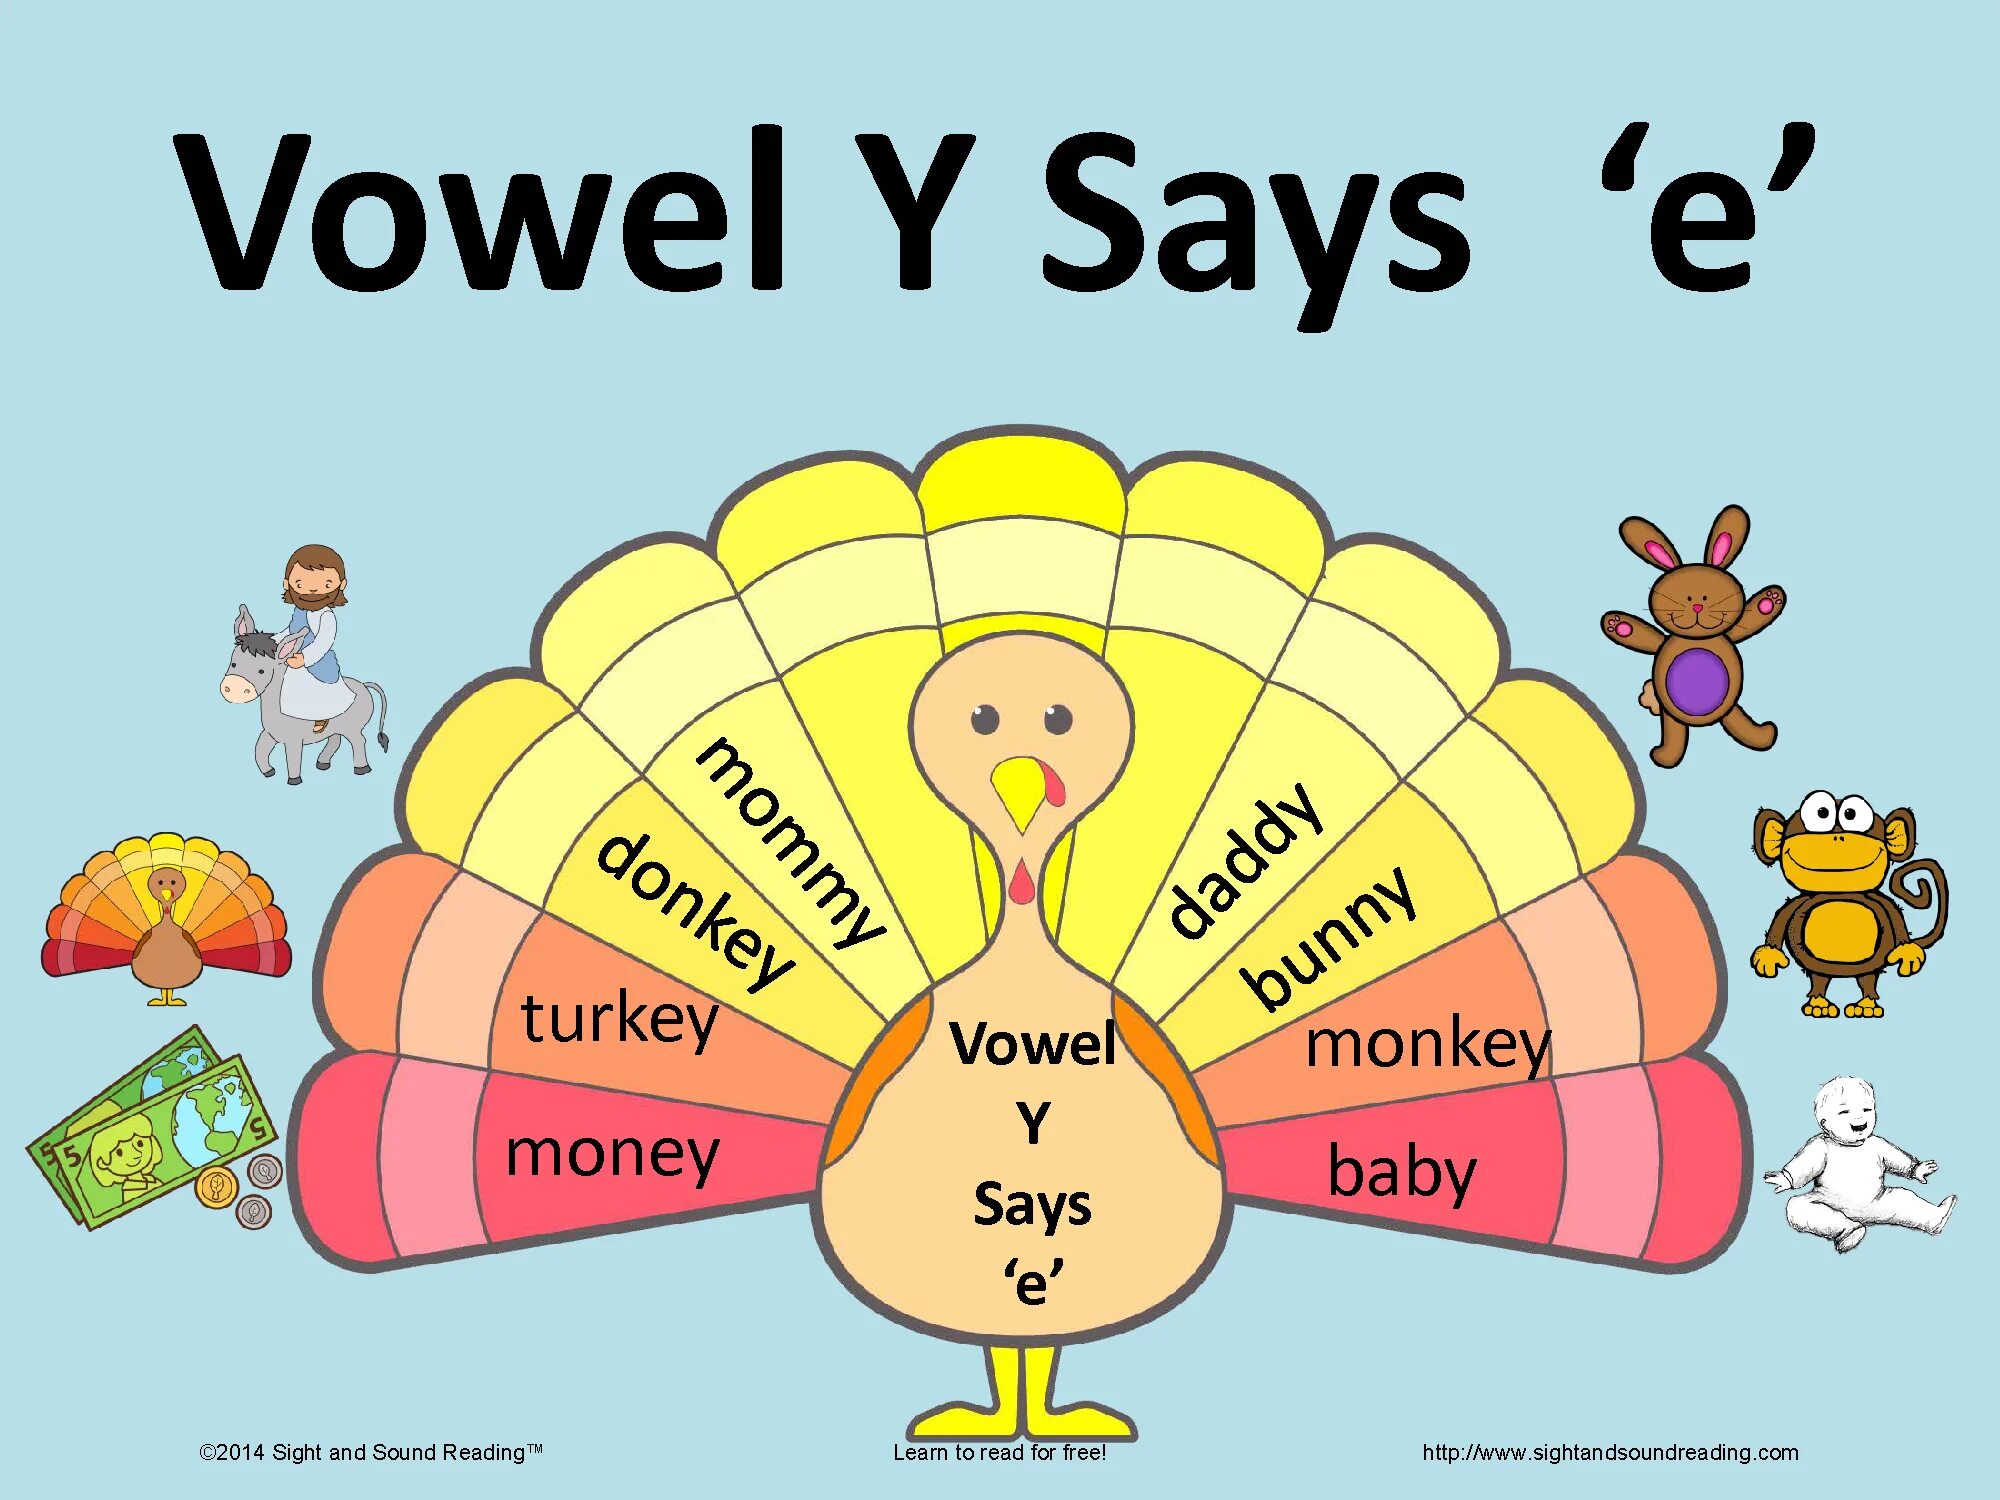 L say like. Letter y Vowel or consonant. Is y a Vowel. Vowels Sound y. Y is Vowel or consonant.